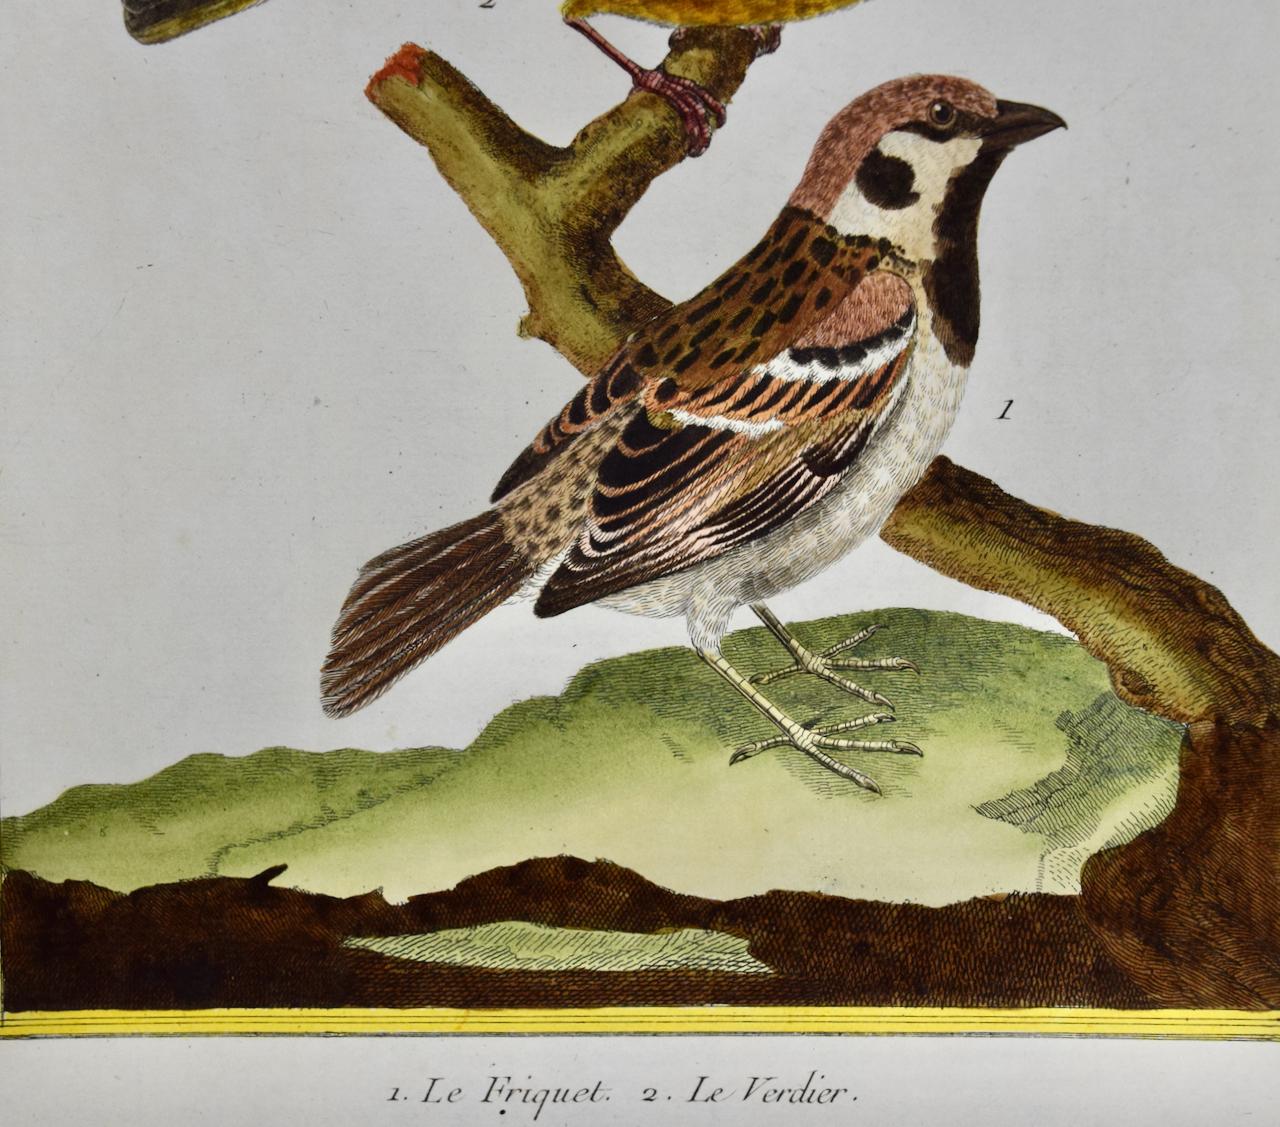 A Greenfinch & A Sparrow: An 18th Century Hand-colored Engraving by Martinet - Naturalistic Print by Francois Nicolas Martinet